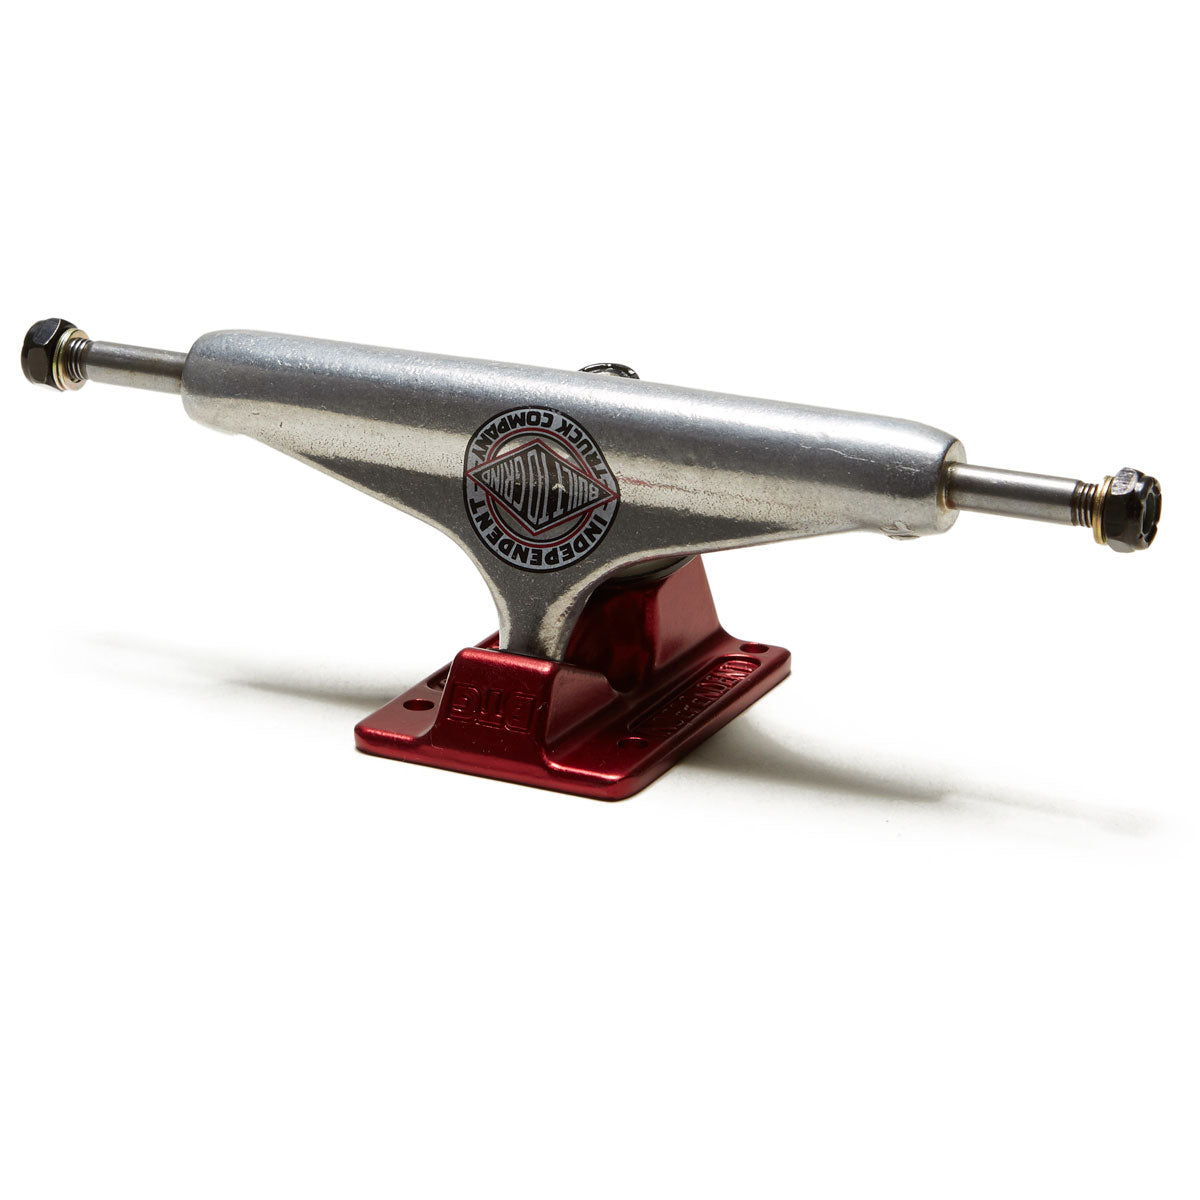 Independent Stage 11 Forged Hollow BTG Summit Standard Skateboard Trucks - Silver/Ano Red - 144mm image 1